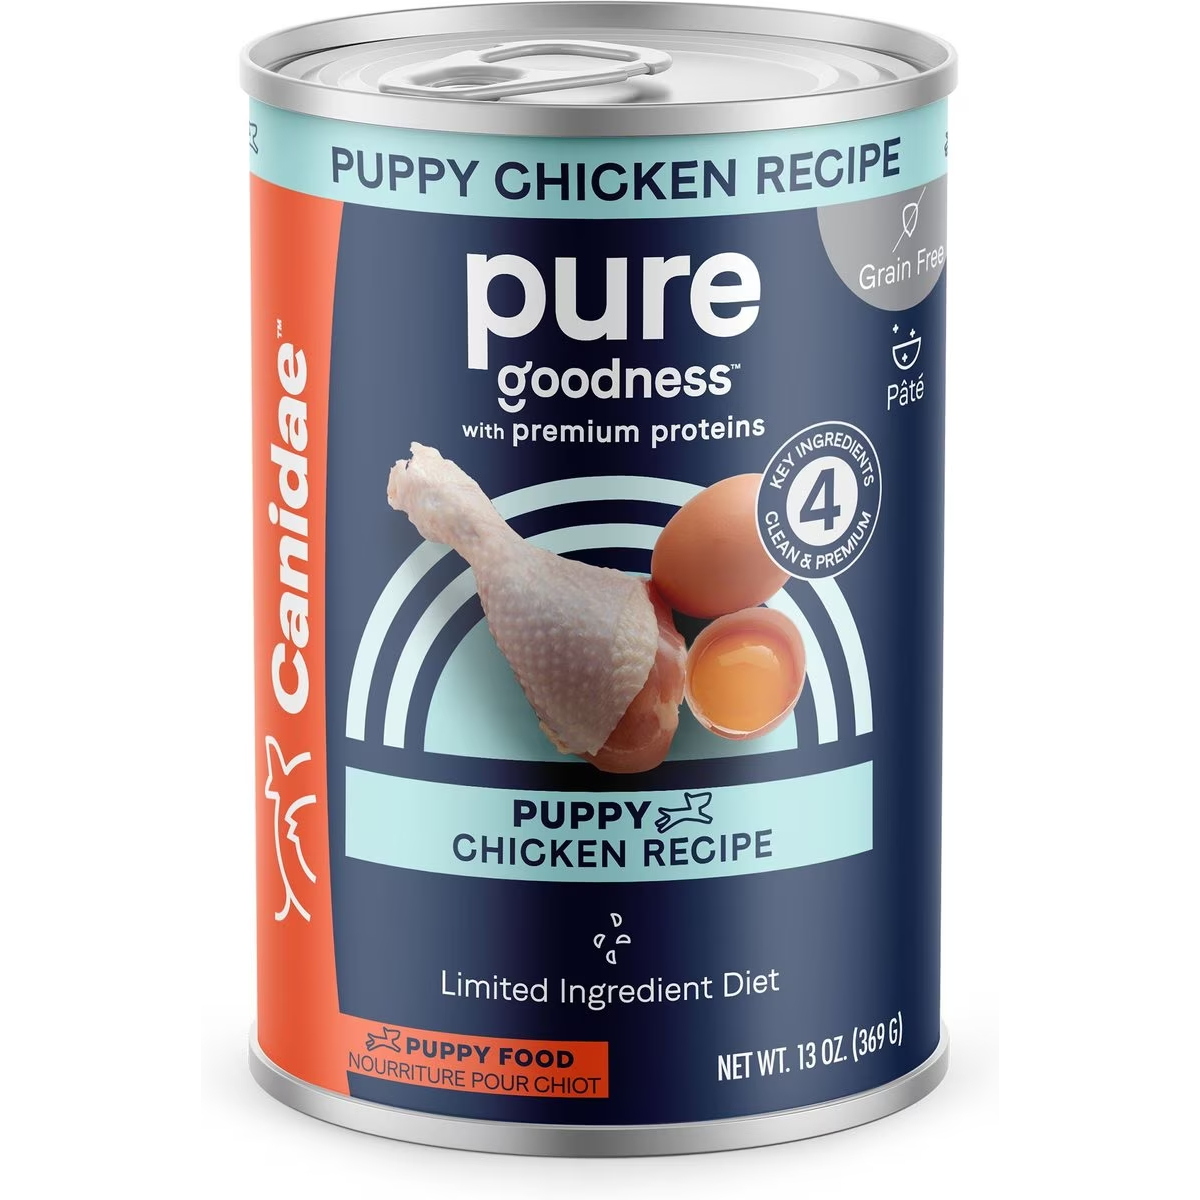 CANIDAE PURE Puppy Grain-Free Limited Ingredient Chicken Recipe Canned Dog Food